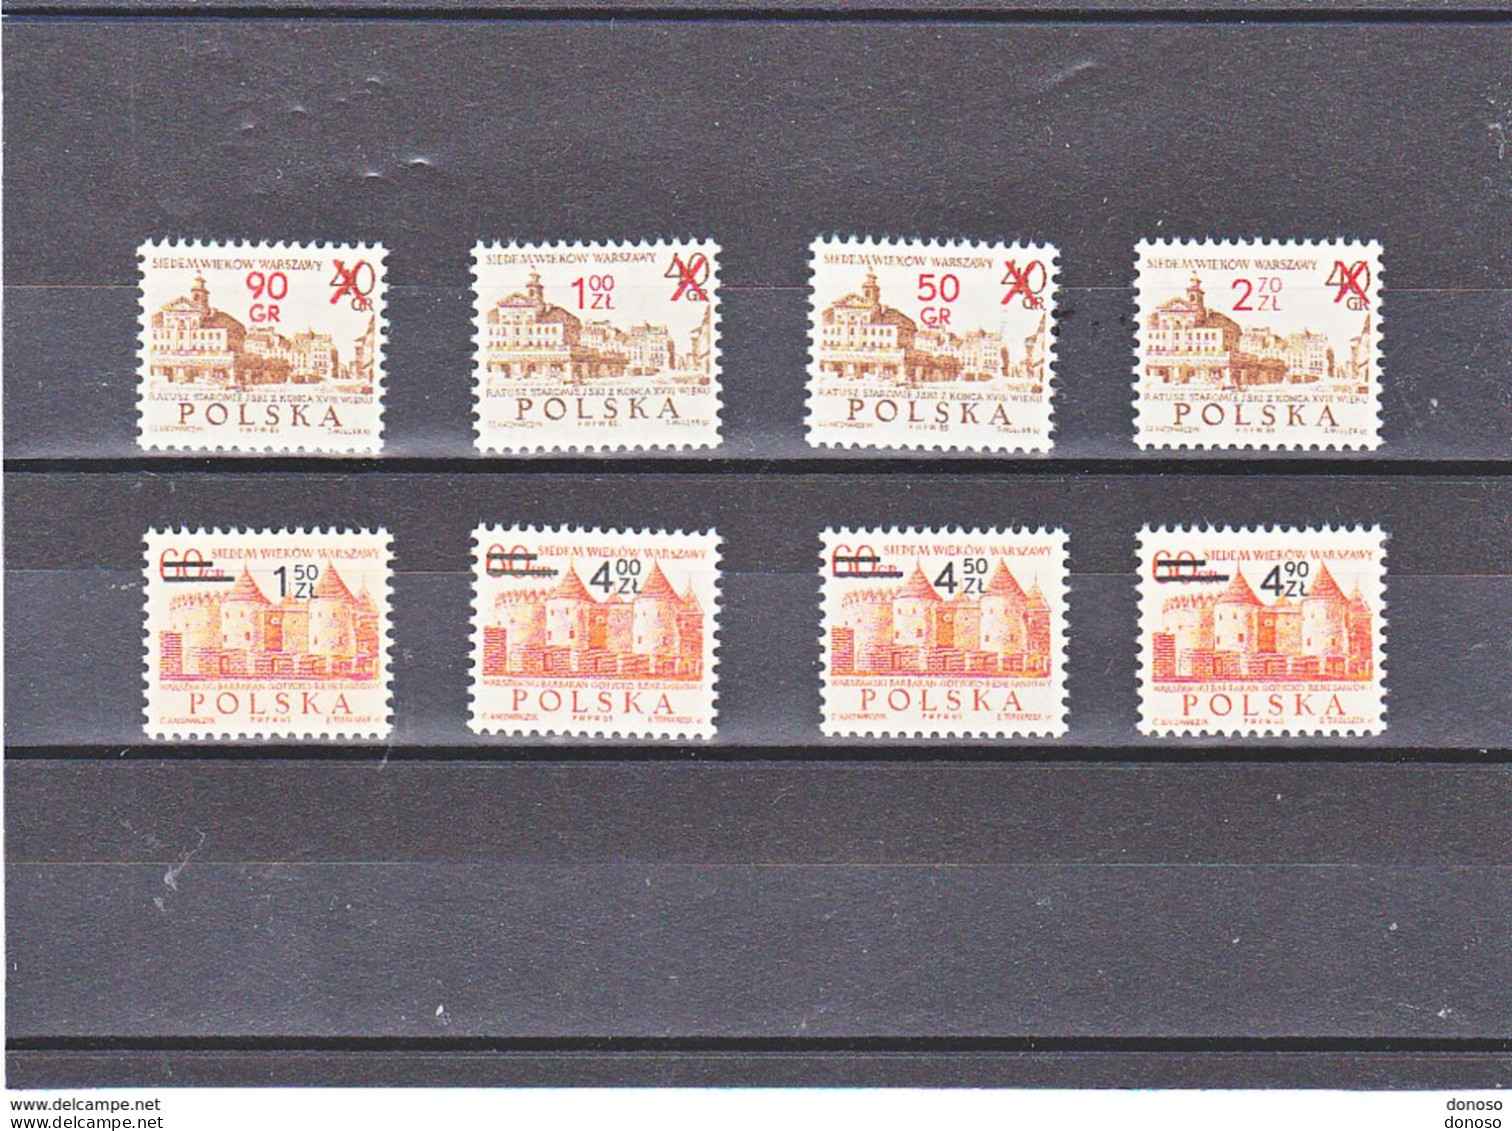 POLOGNE 1972 SURCHARGES Yvert 2041-2048,  Michel 2195-2200 NEUF** MNH Cote 3,50 Euros - Unused Stamps